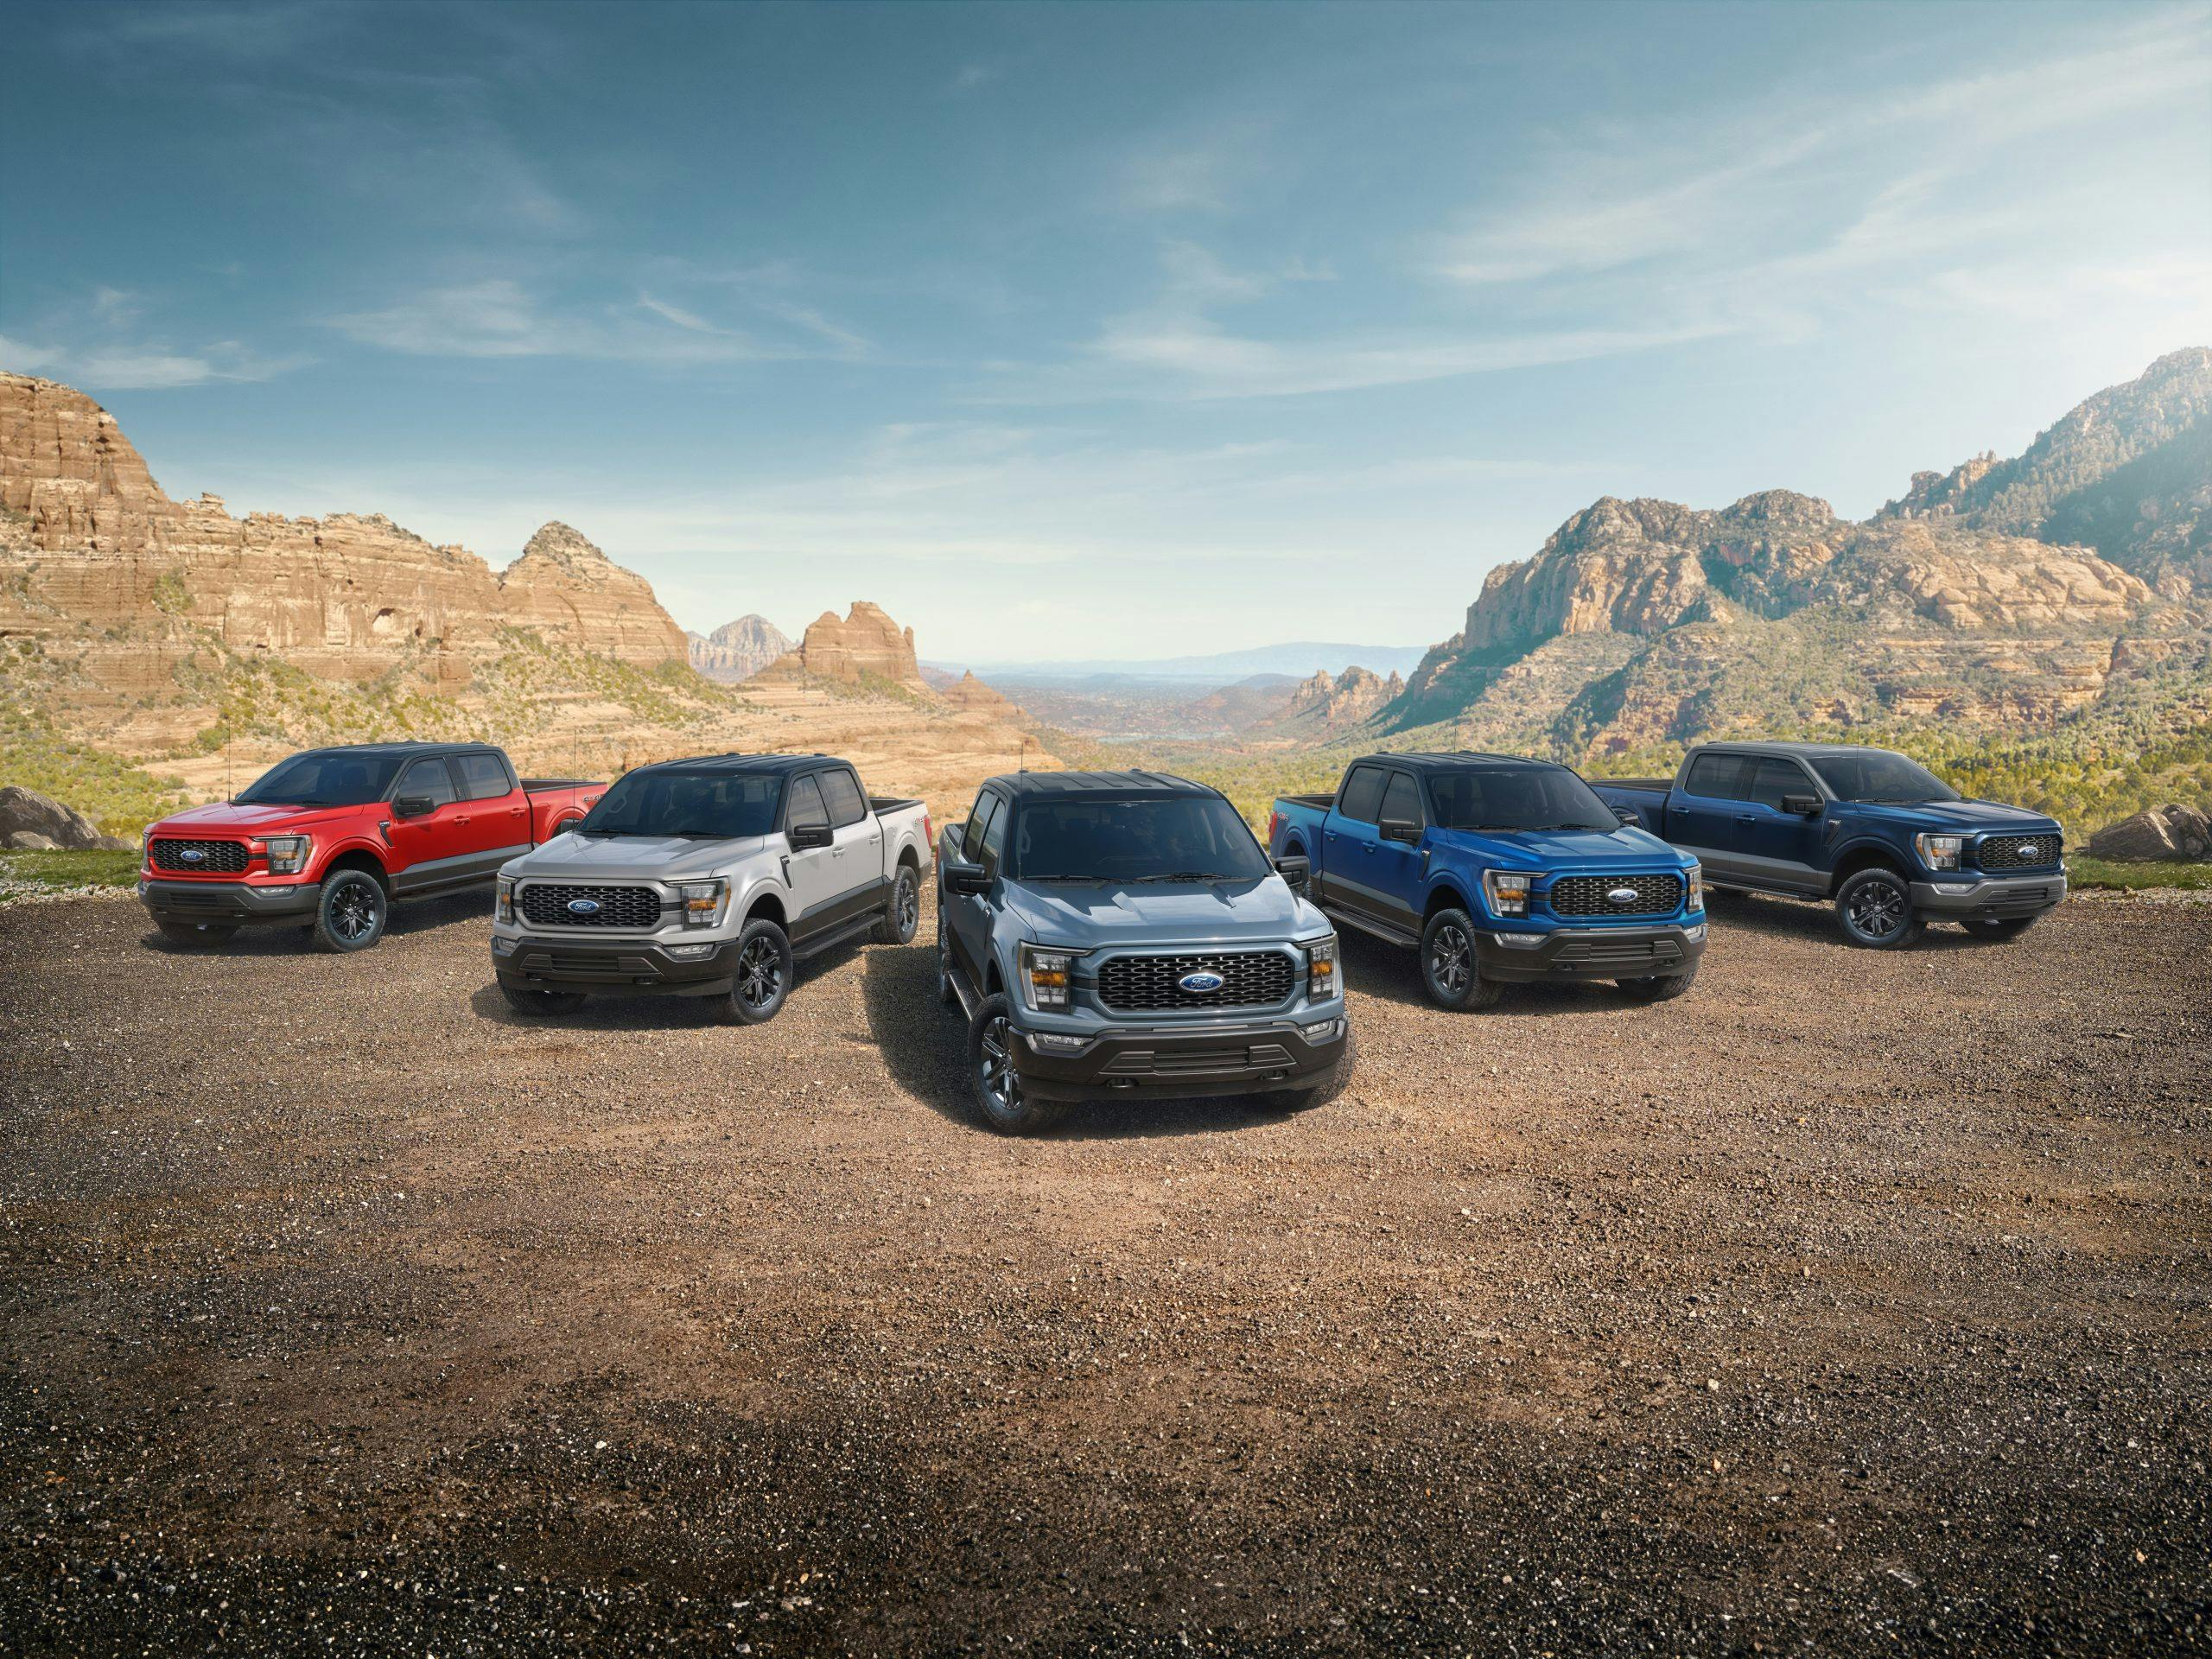 2023 F-150 Heritage Edition five-truck group shot